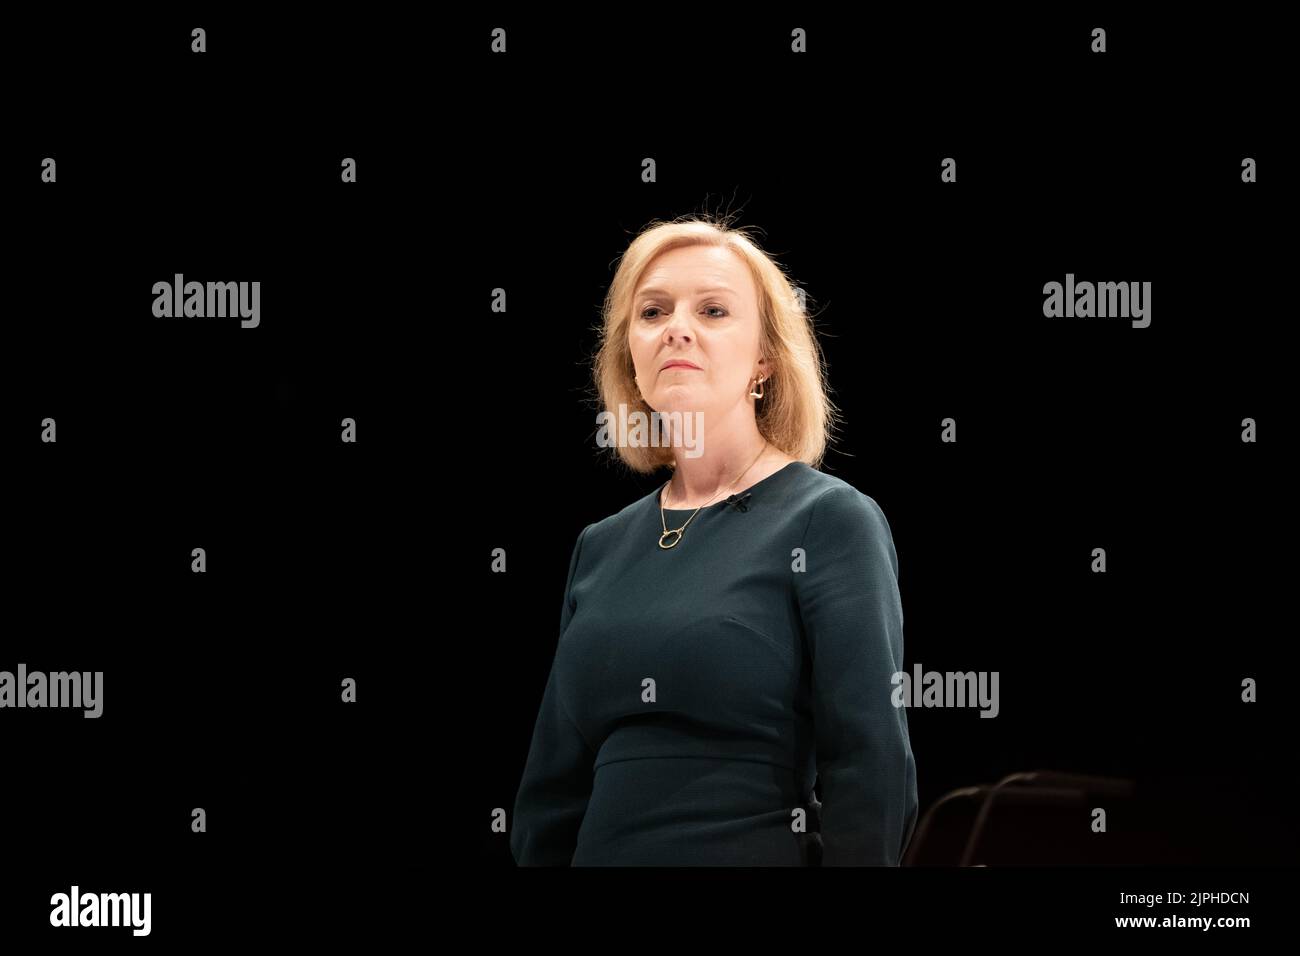 Liz Truss 2022 - Liz Truss at the Conservative Leadership Election Hustings in Perth, Scotland, UK - 16 August 2022 Stock Photo